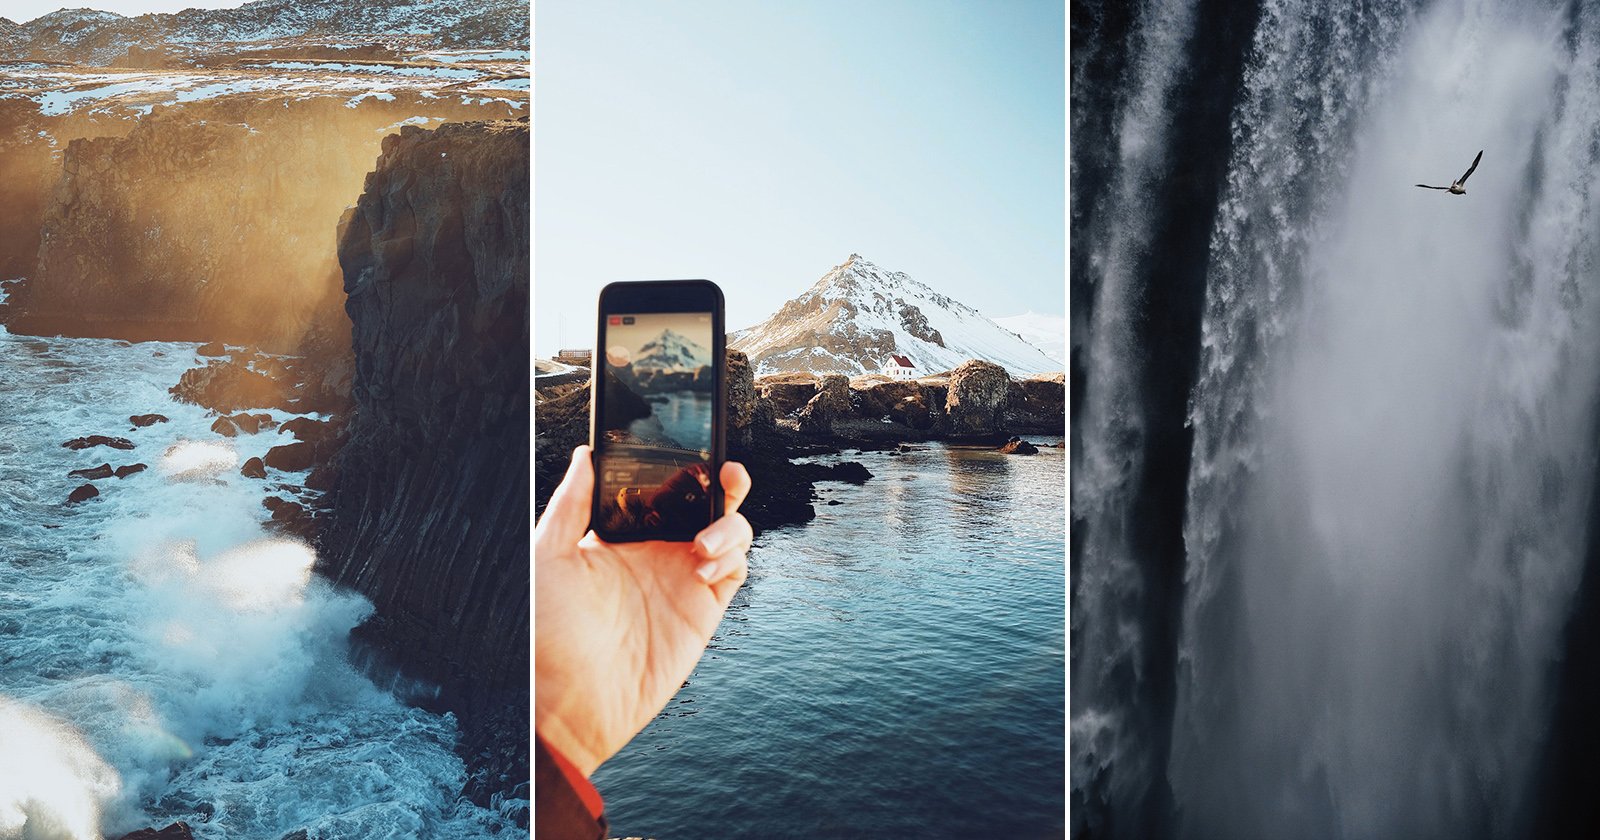 Leave the Laptop at Home: My Mobile Editing Workflow in Iceland